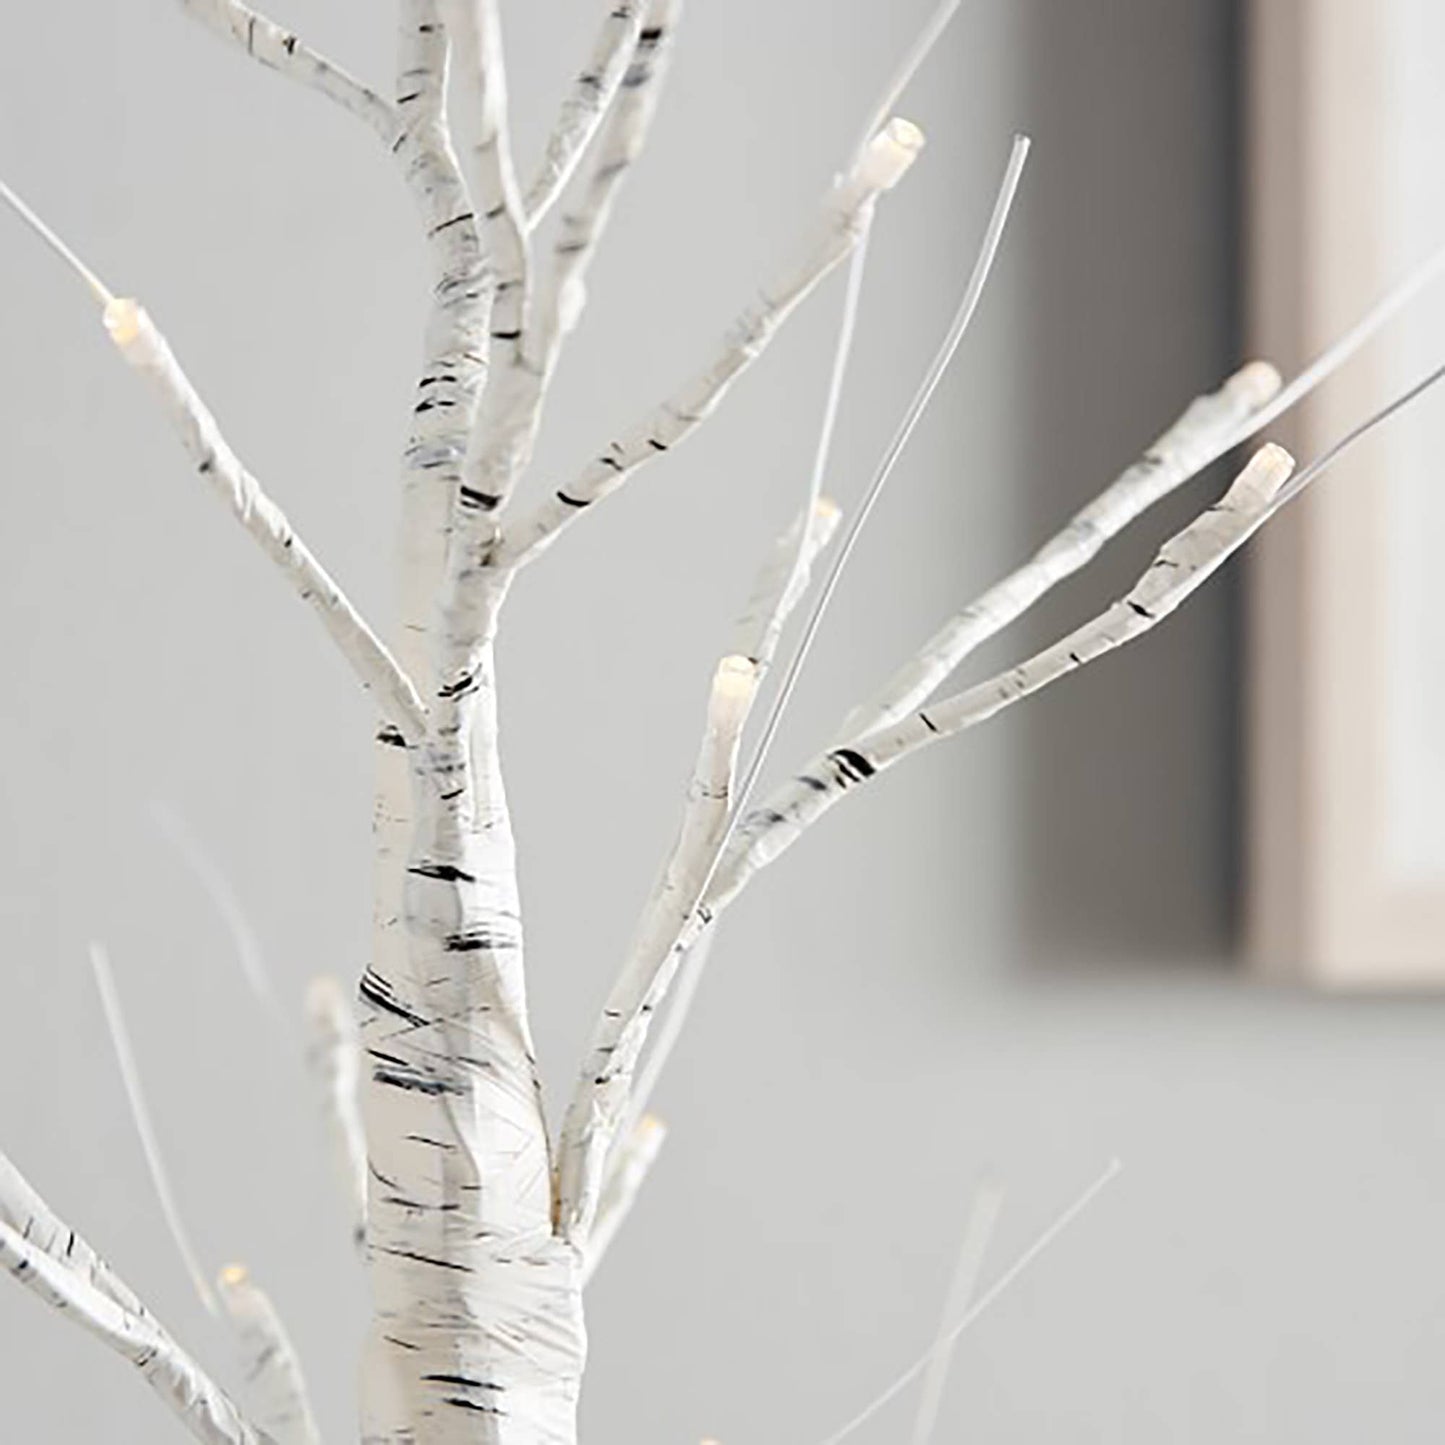 50CM Table Birch Tree 18 LED Battery Operated,